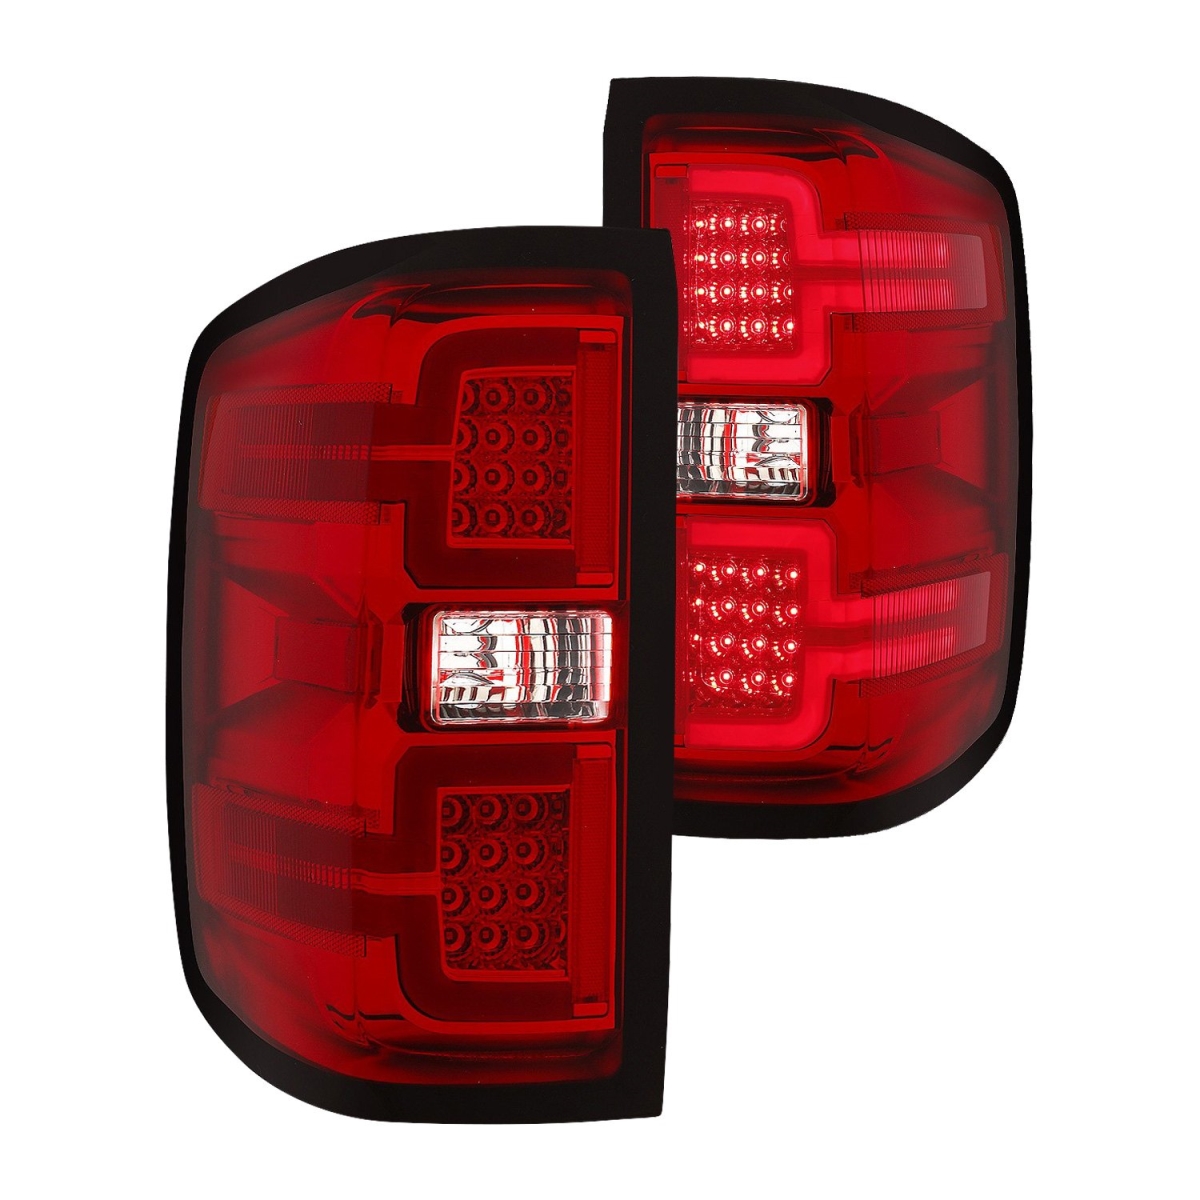 311292 Sequential Fiber Optic Led Tail Light For 2014-2019 Chevy Silverad0 1500 & 3500 - Red & Chrome